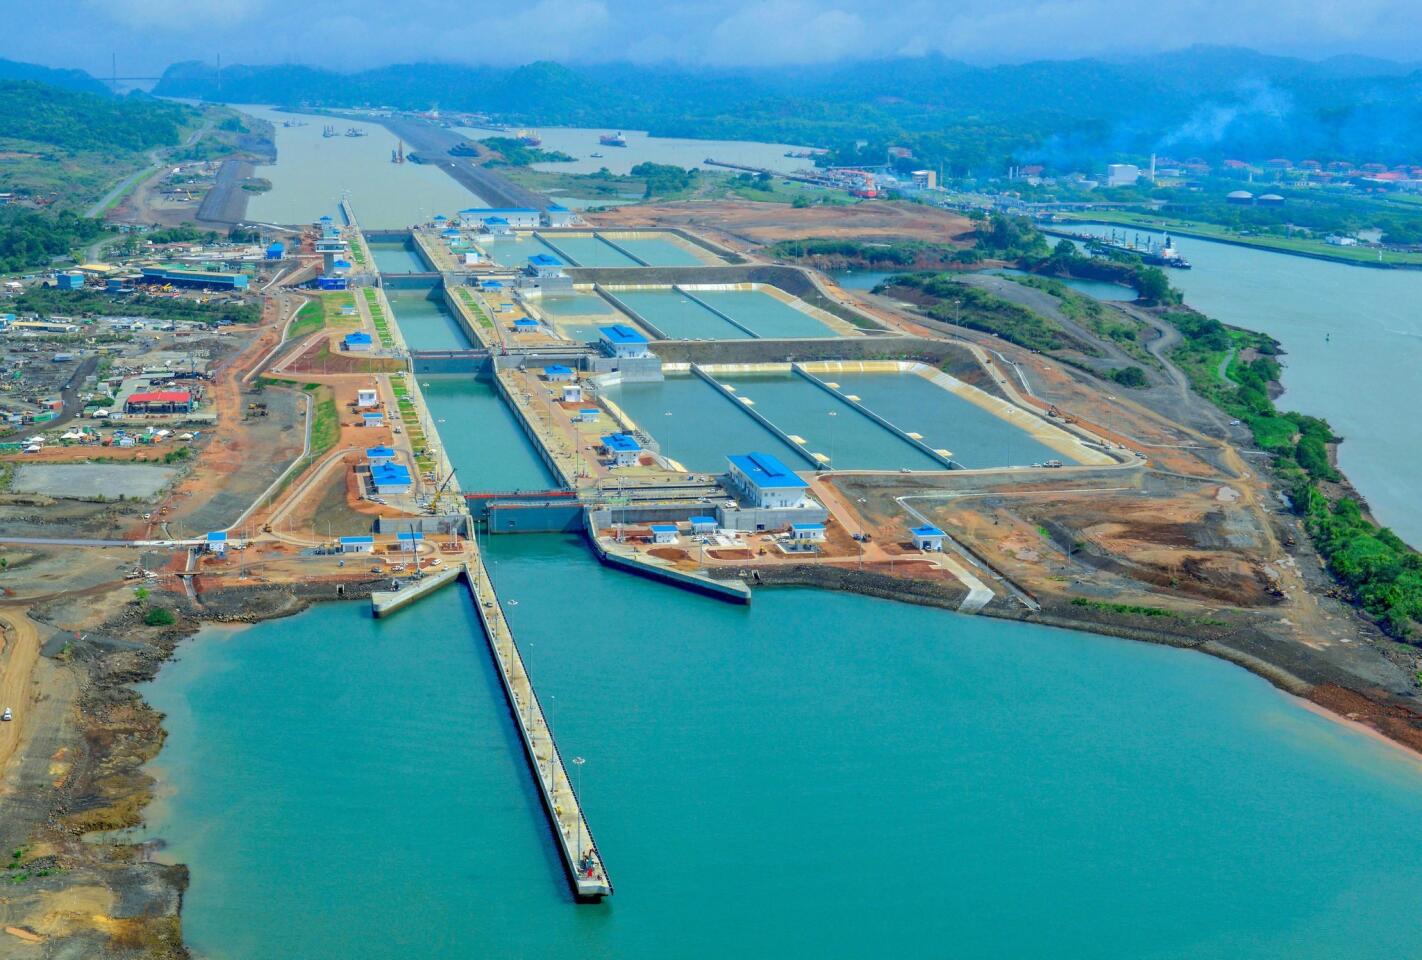 Inauguration of new expanded Panama Canal